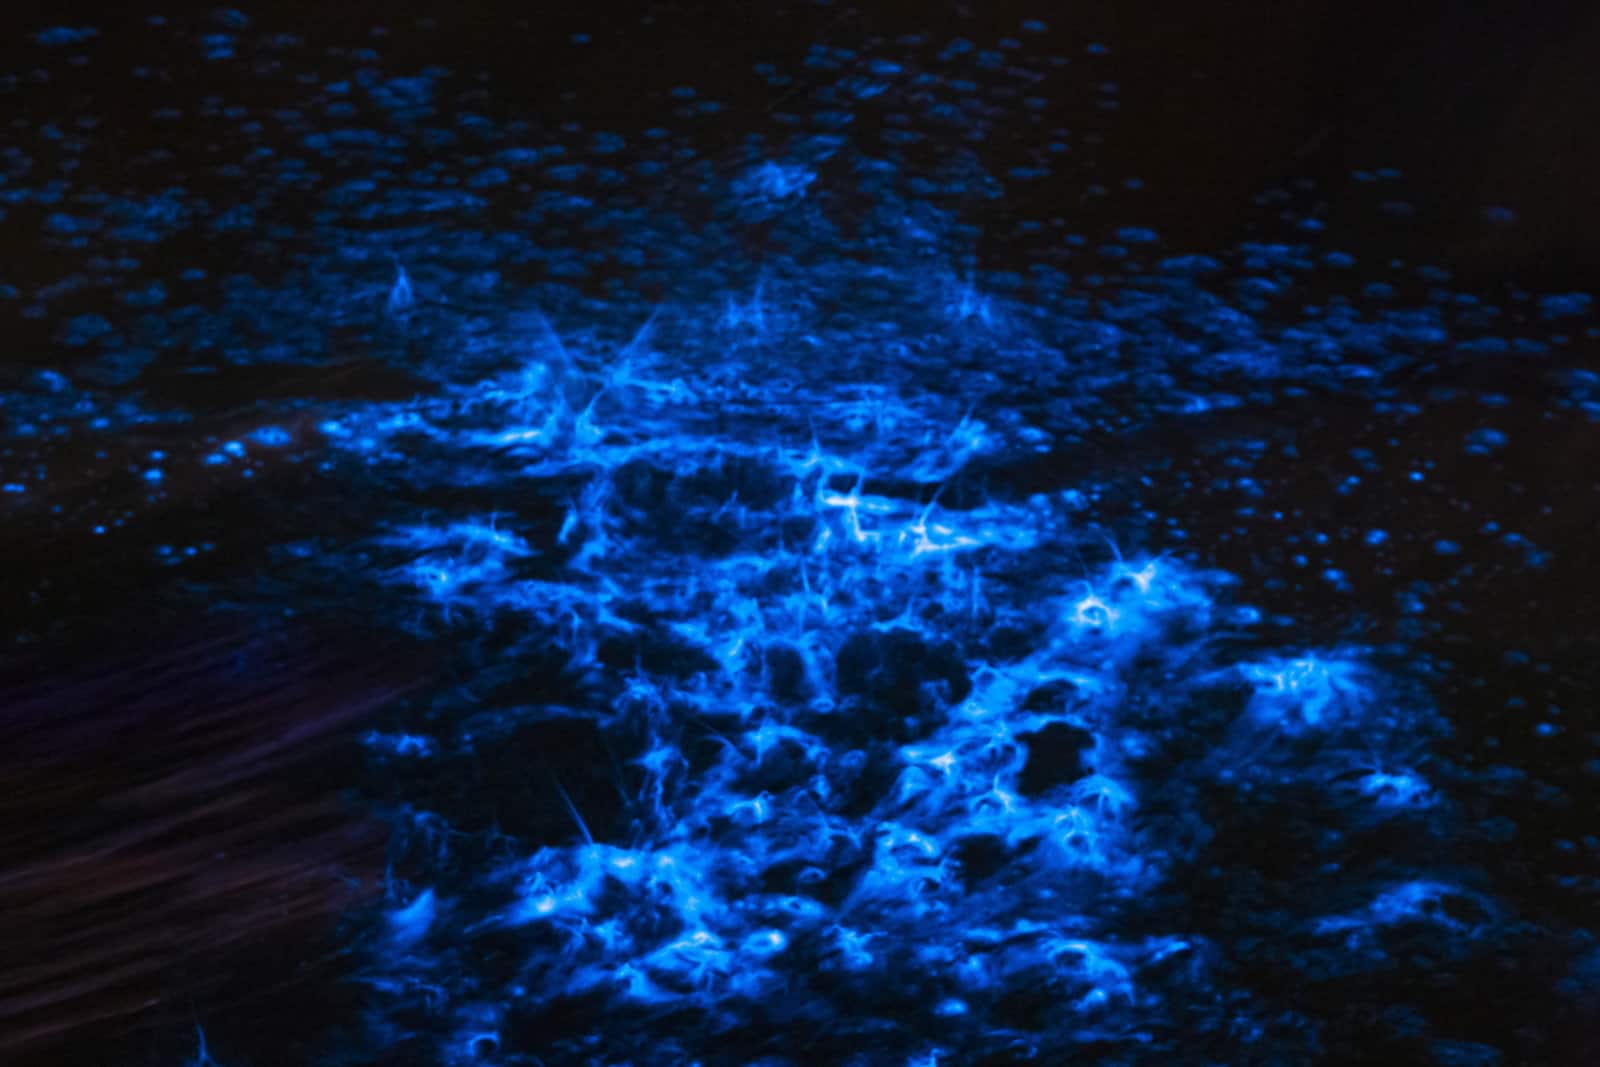 Bioluminescence Florida When Can You View This Amazing Wonder